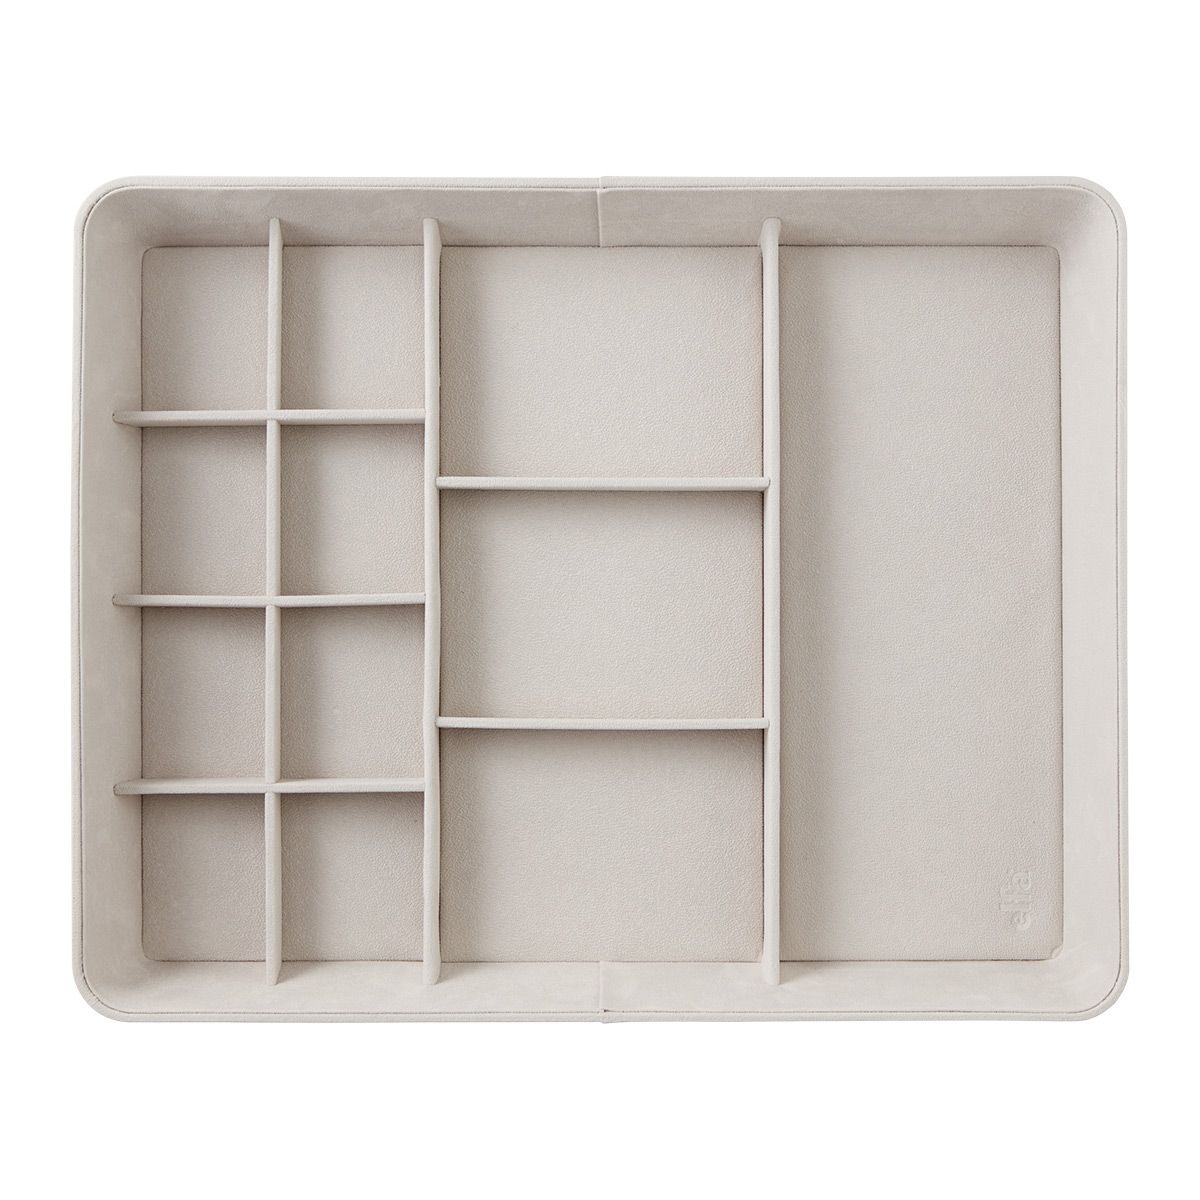 Elfa Décor Accessory Trays | The Container Store